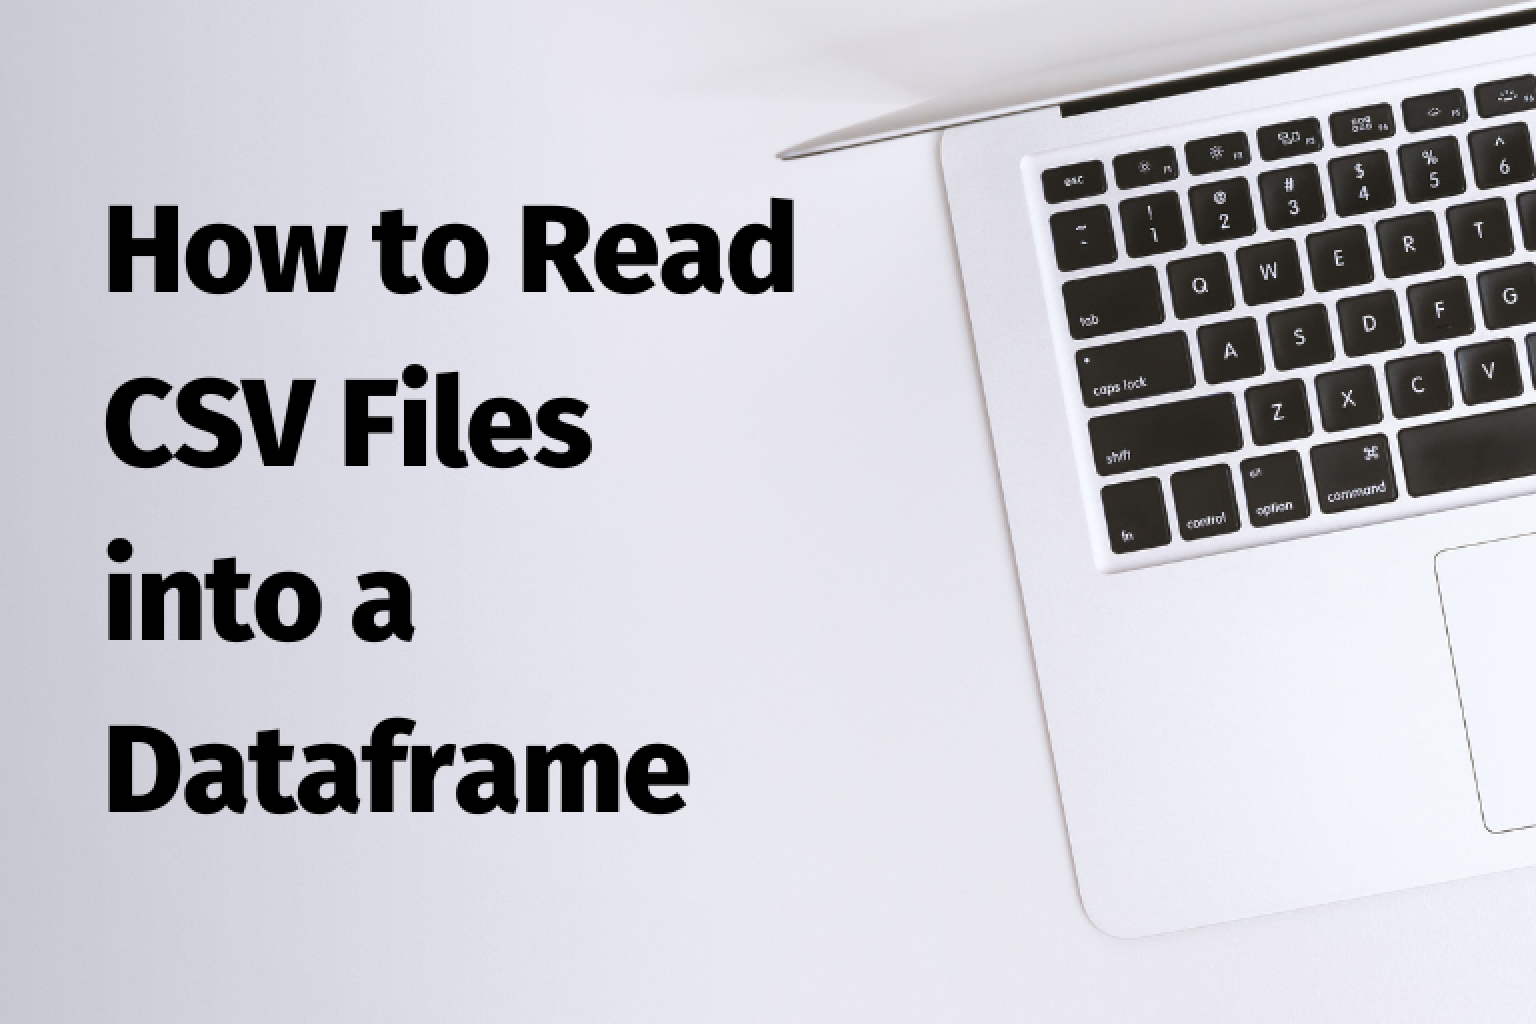 This article discusses how to read CSV files into dataframes using Python's Pandas library and R, with various scenarios such as custom delimiters, skipping rows and headers, handling missing data, setting custom column names, and converting data types. And we would explore how to use PyGWalker as a GUI for dataframe.